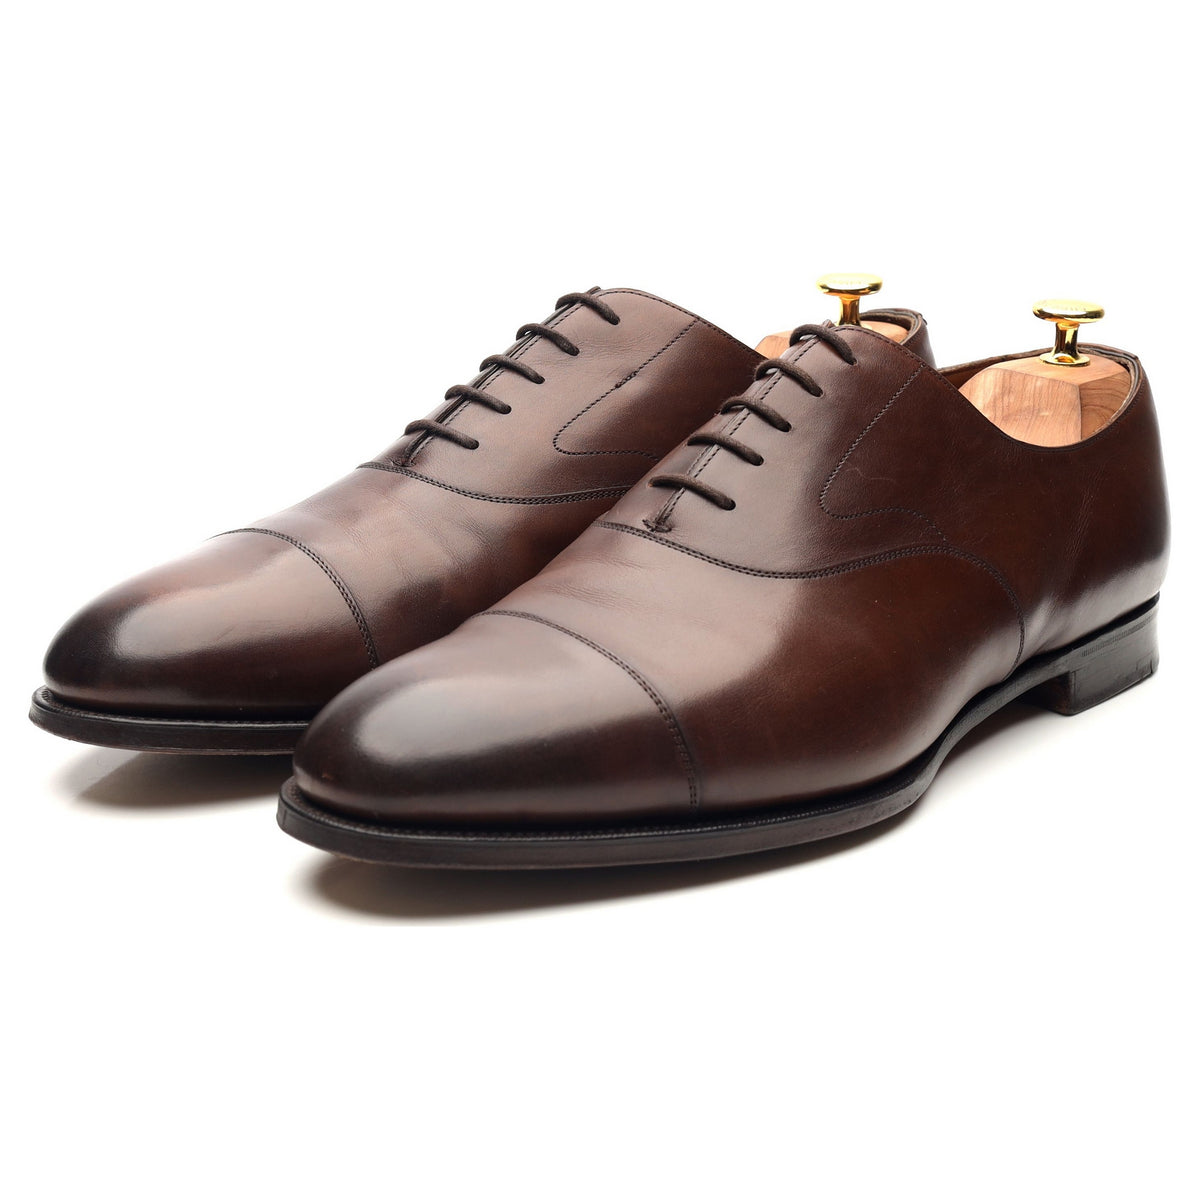 Chelsea' Dark Brown Leather Oxford UK 13 E - Abbot's Shoes